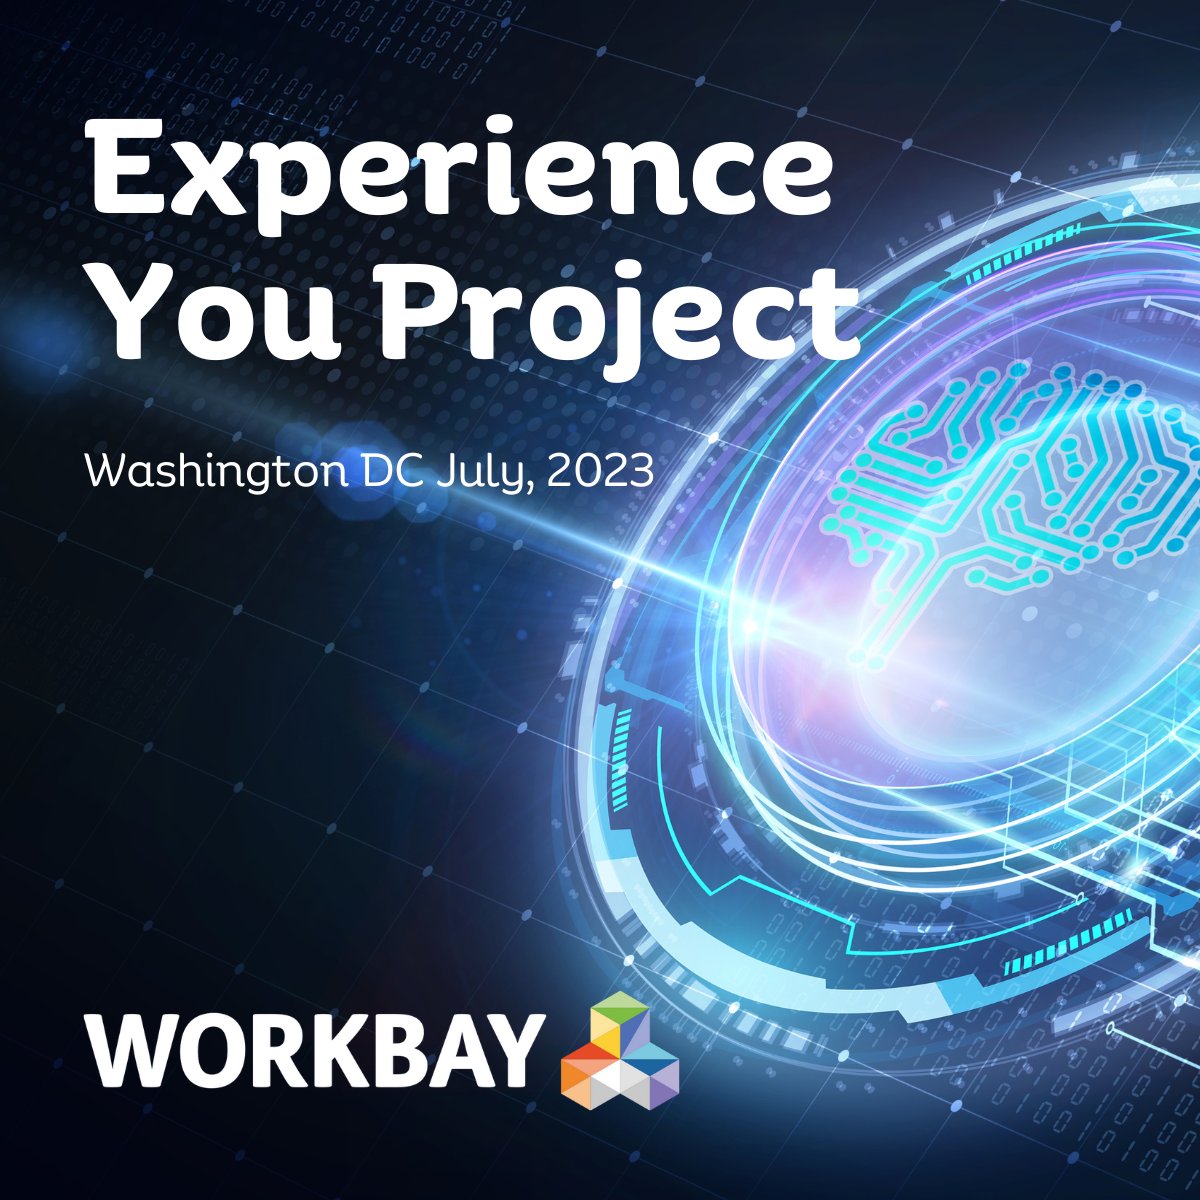 Excited to be presenting our work for the Experience You project in Washington DC this week. Some great work from the Workbay team and our collaborators Julie Keane, PhD and Krystal Rawls, Ph.D.